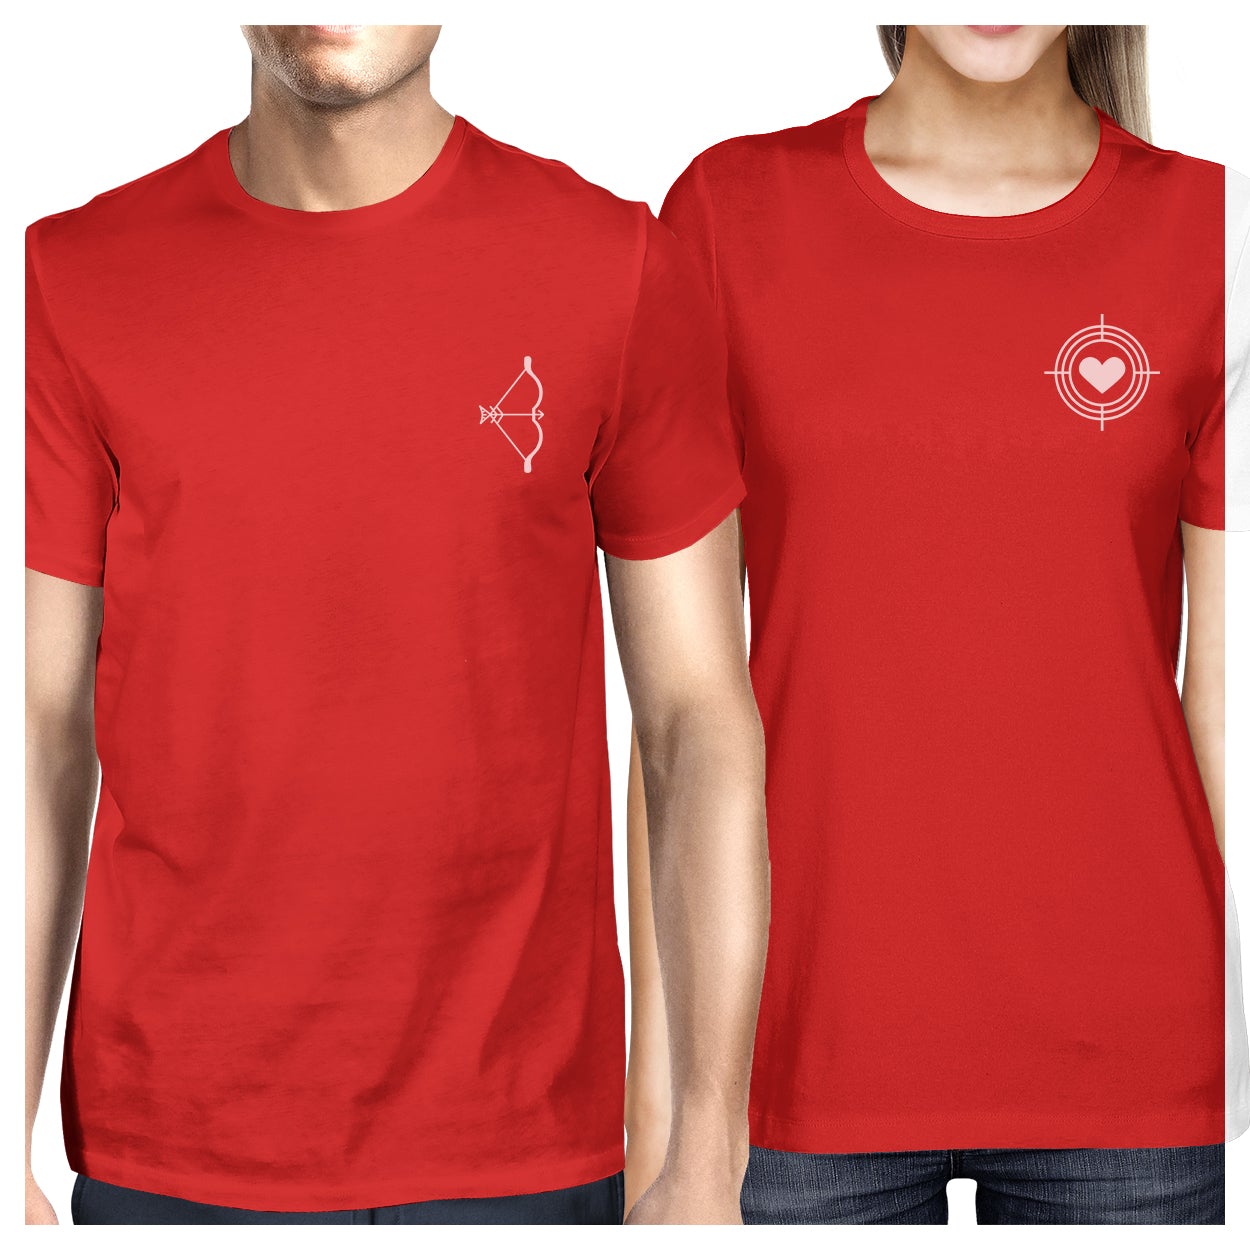 Bow And Arrow To Heart Target Matching Couple Red Shirts